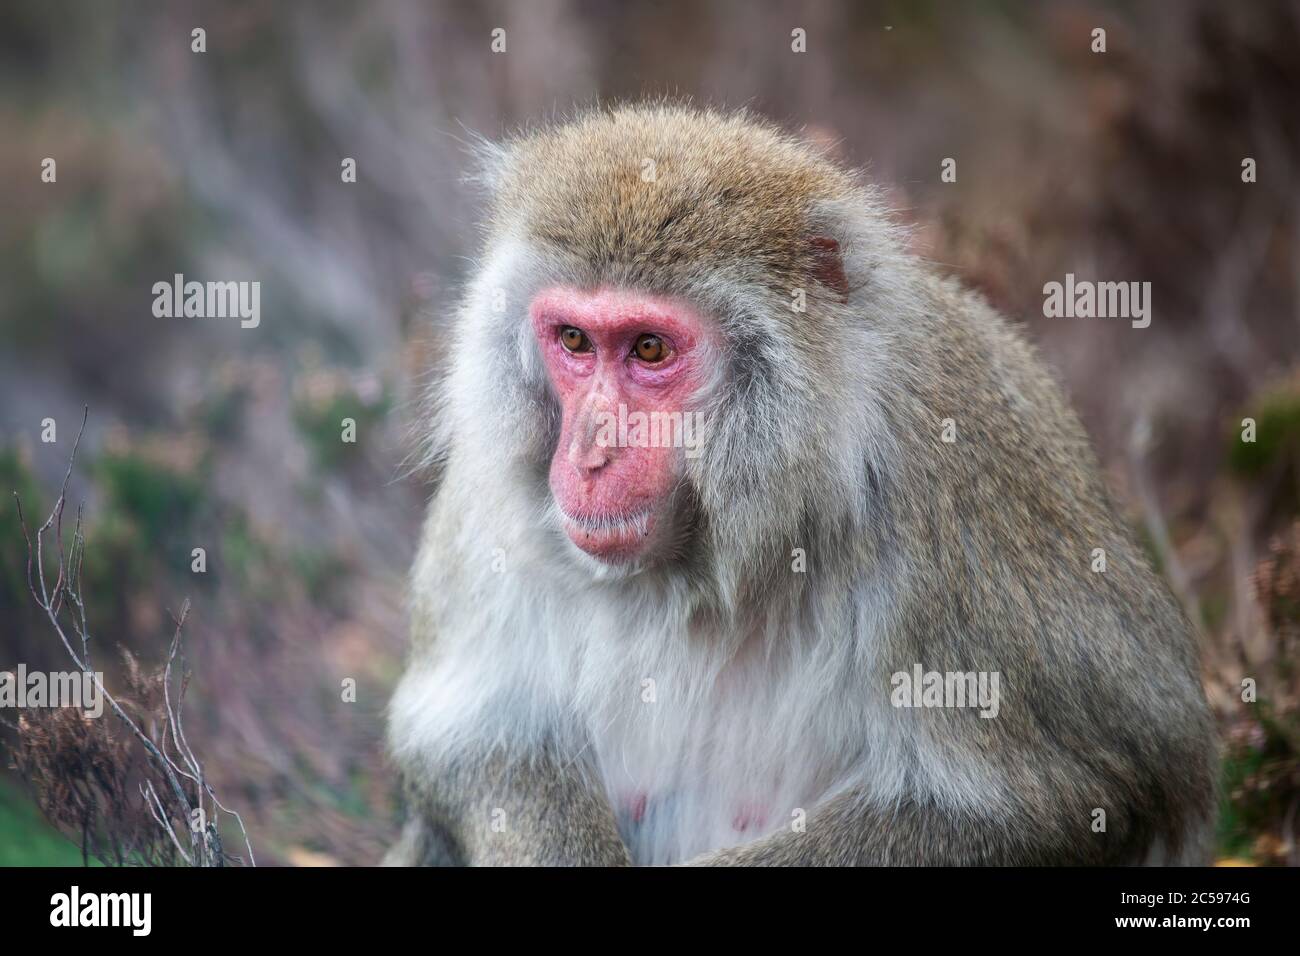 A Japanese Macaque Macaca fuscata (captive) showing face and body in close up Stock Photo